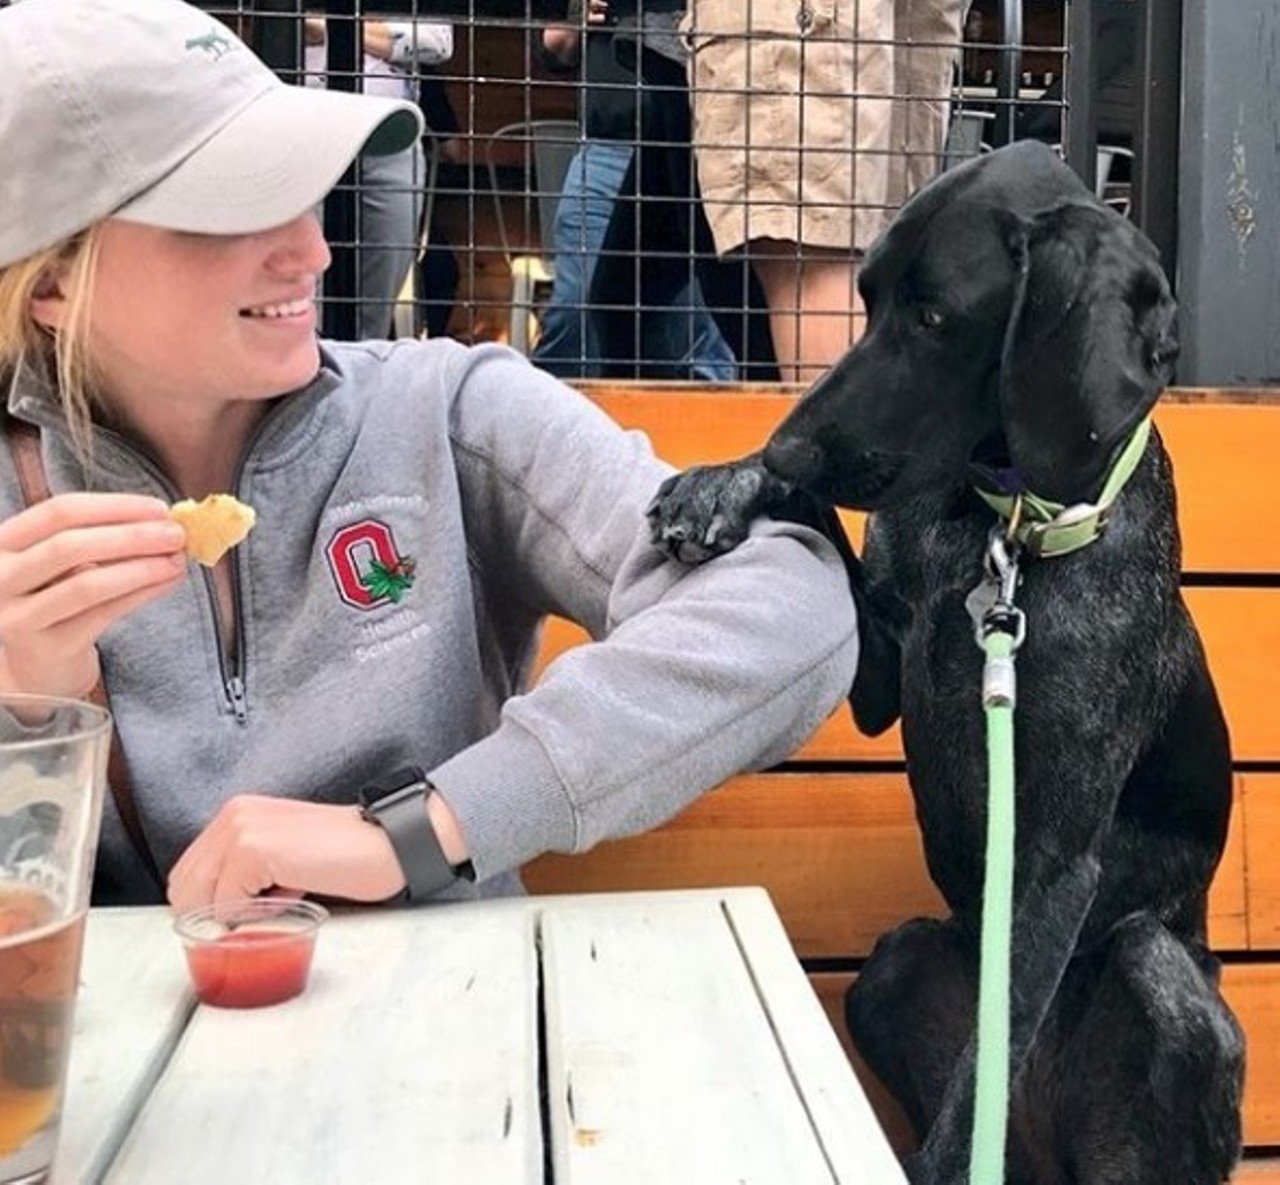 Nano Brew
1859 W. 25th St., Cleveland
The water bowls placed around the patio of this place are a clear indication that dogs are welcome here. With plenty of space and picnic style tables on the side and the back, you and your four-legged friend can enjoy the day. 
Photo via oakley_gsp_cle/Instagram